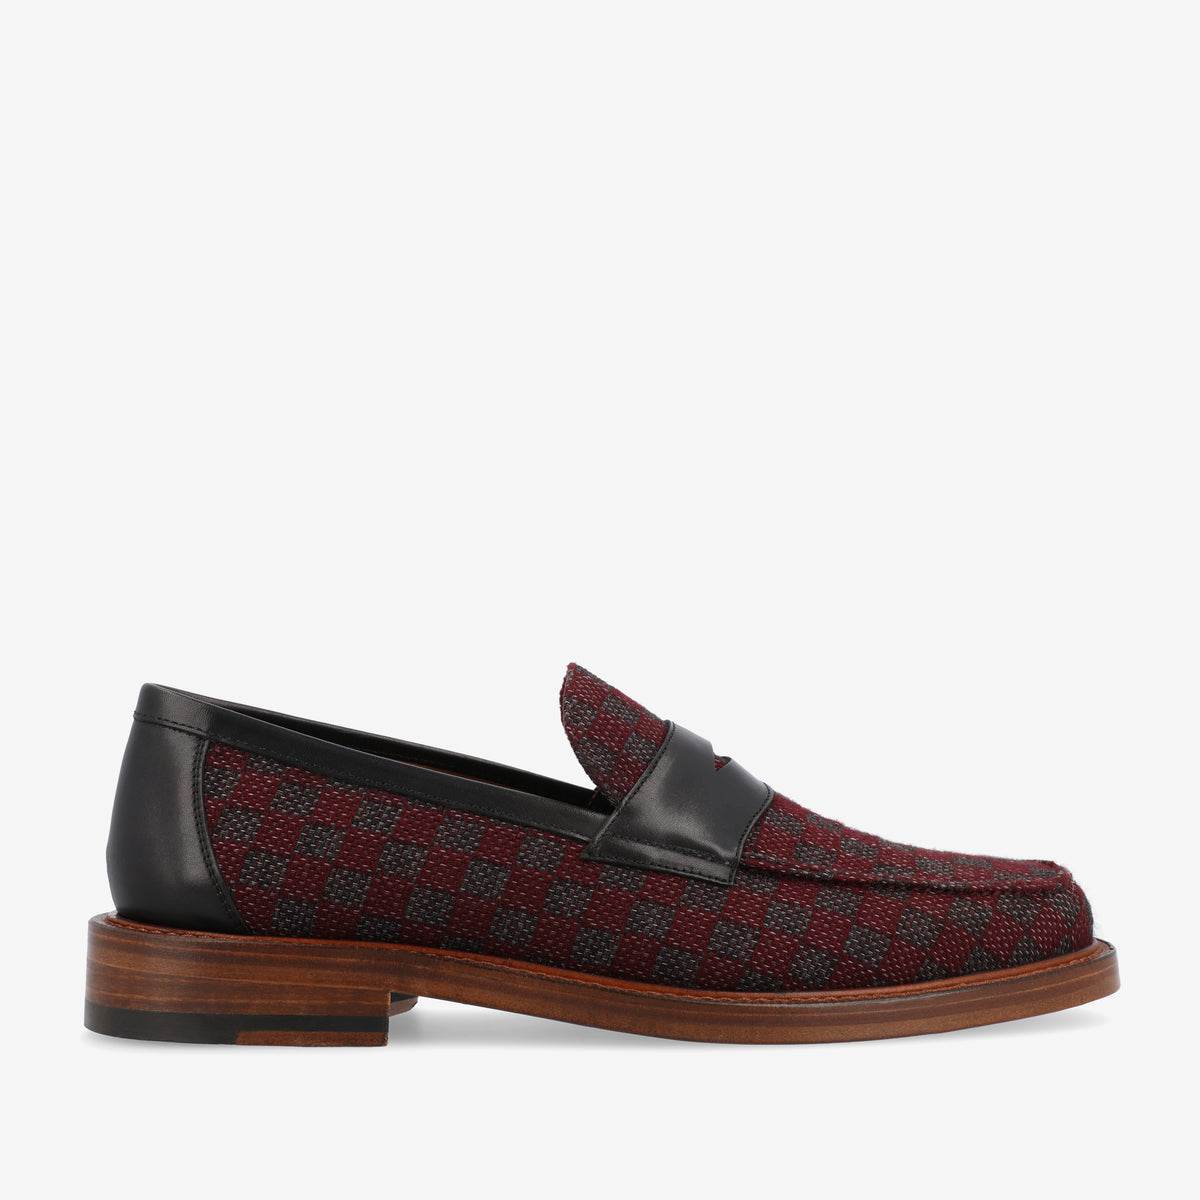 The Fitz Loafer in Maroon Check